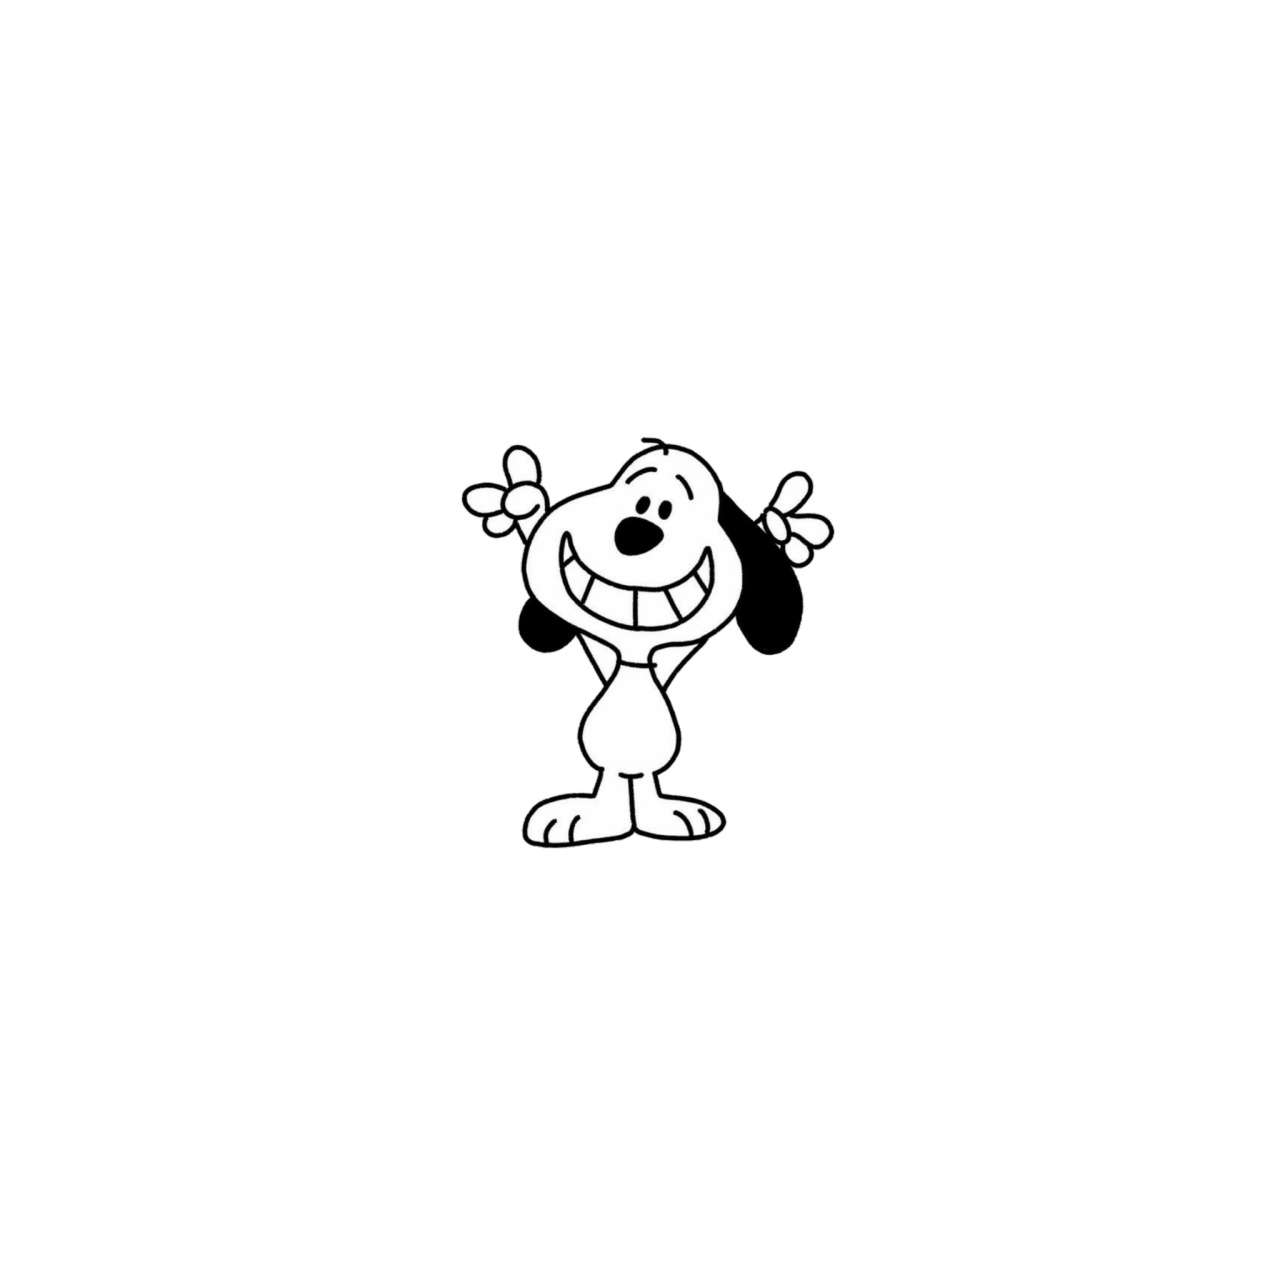 A R T Snoopy Png Just Like Or Reblog Don T Repost